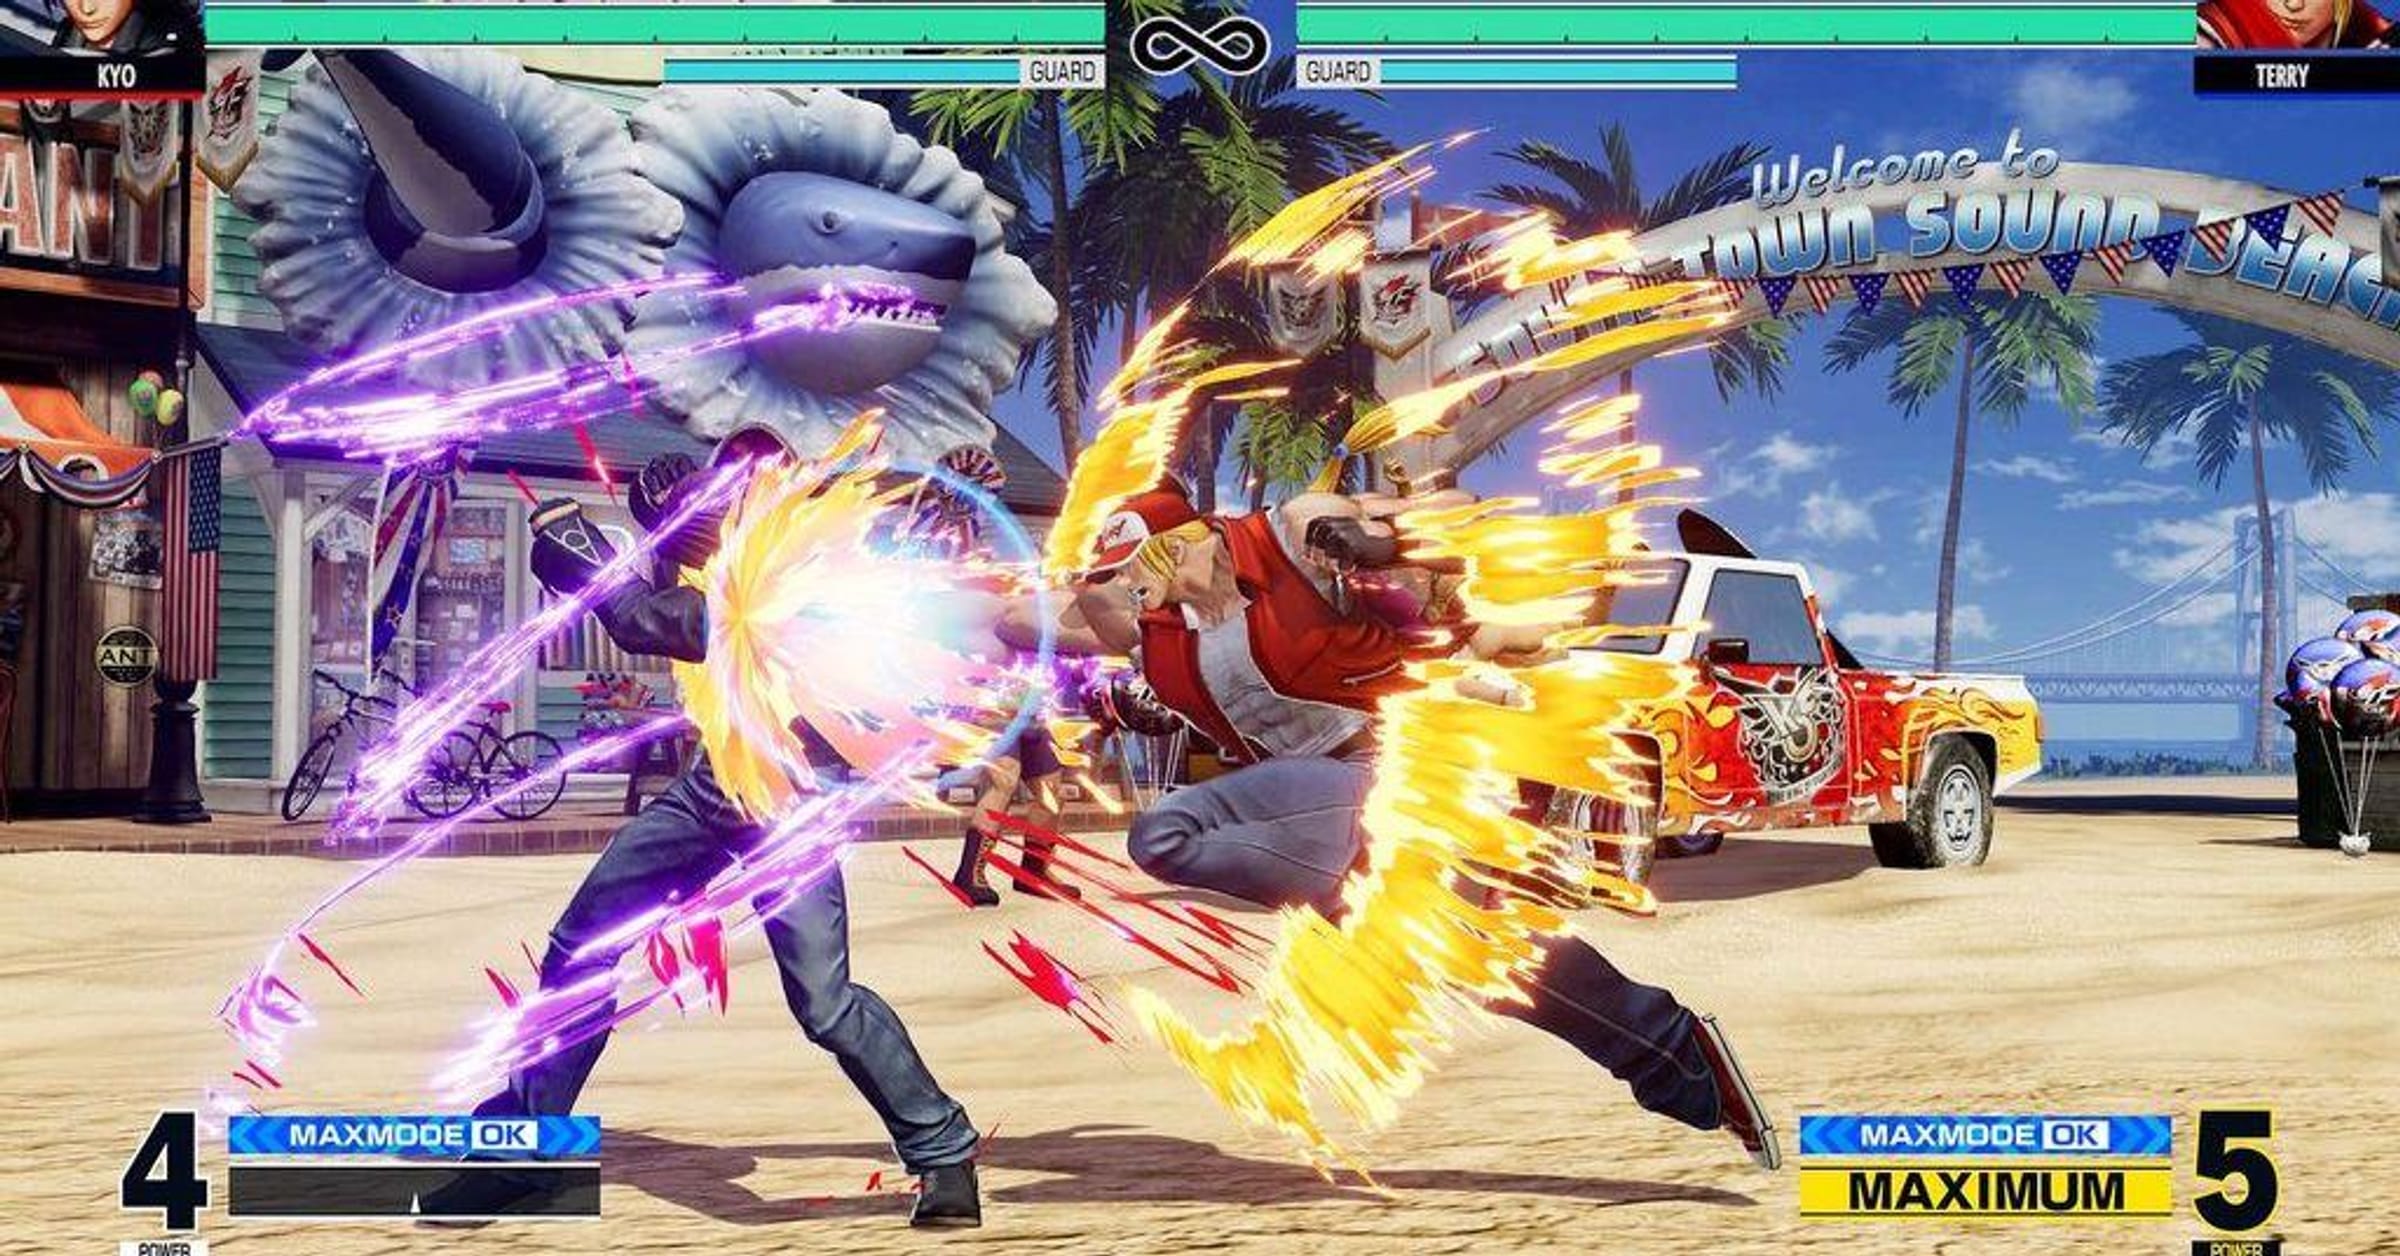 The King of Fighters: The History Behind the First Crossover Fighting Game